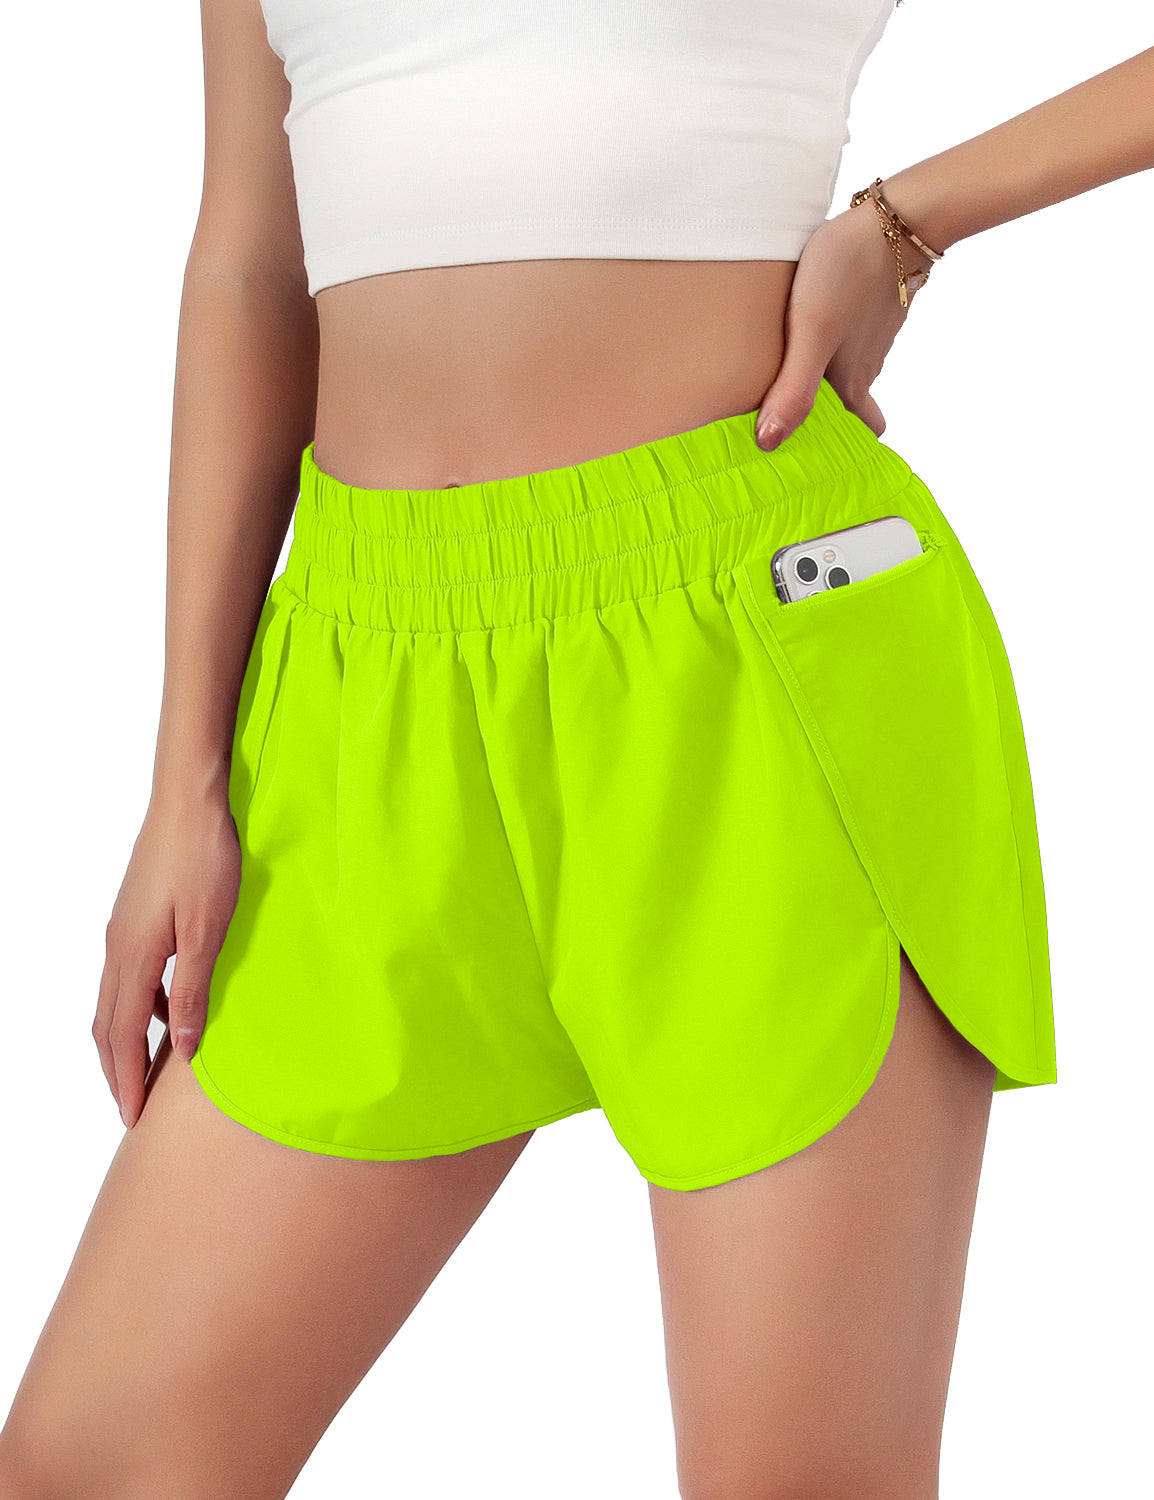 Blooming Jelly Shorts Women's Athletic Quick-Dry Running Shorts